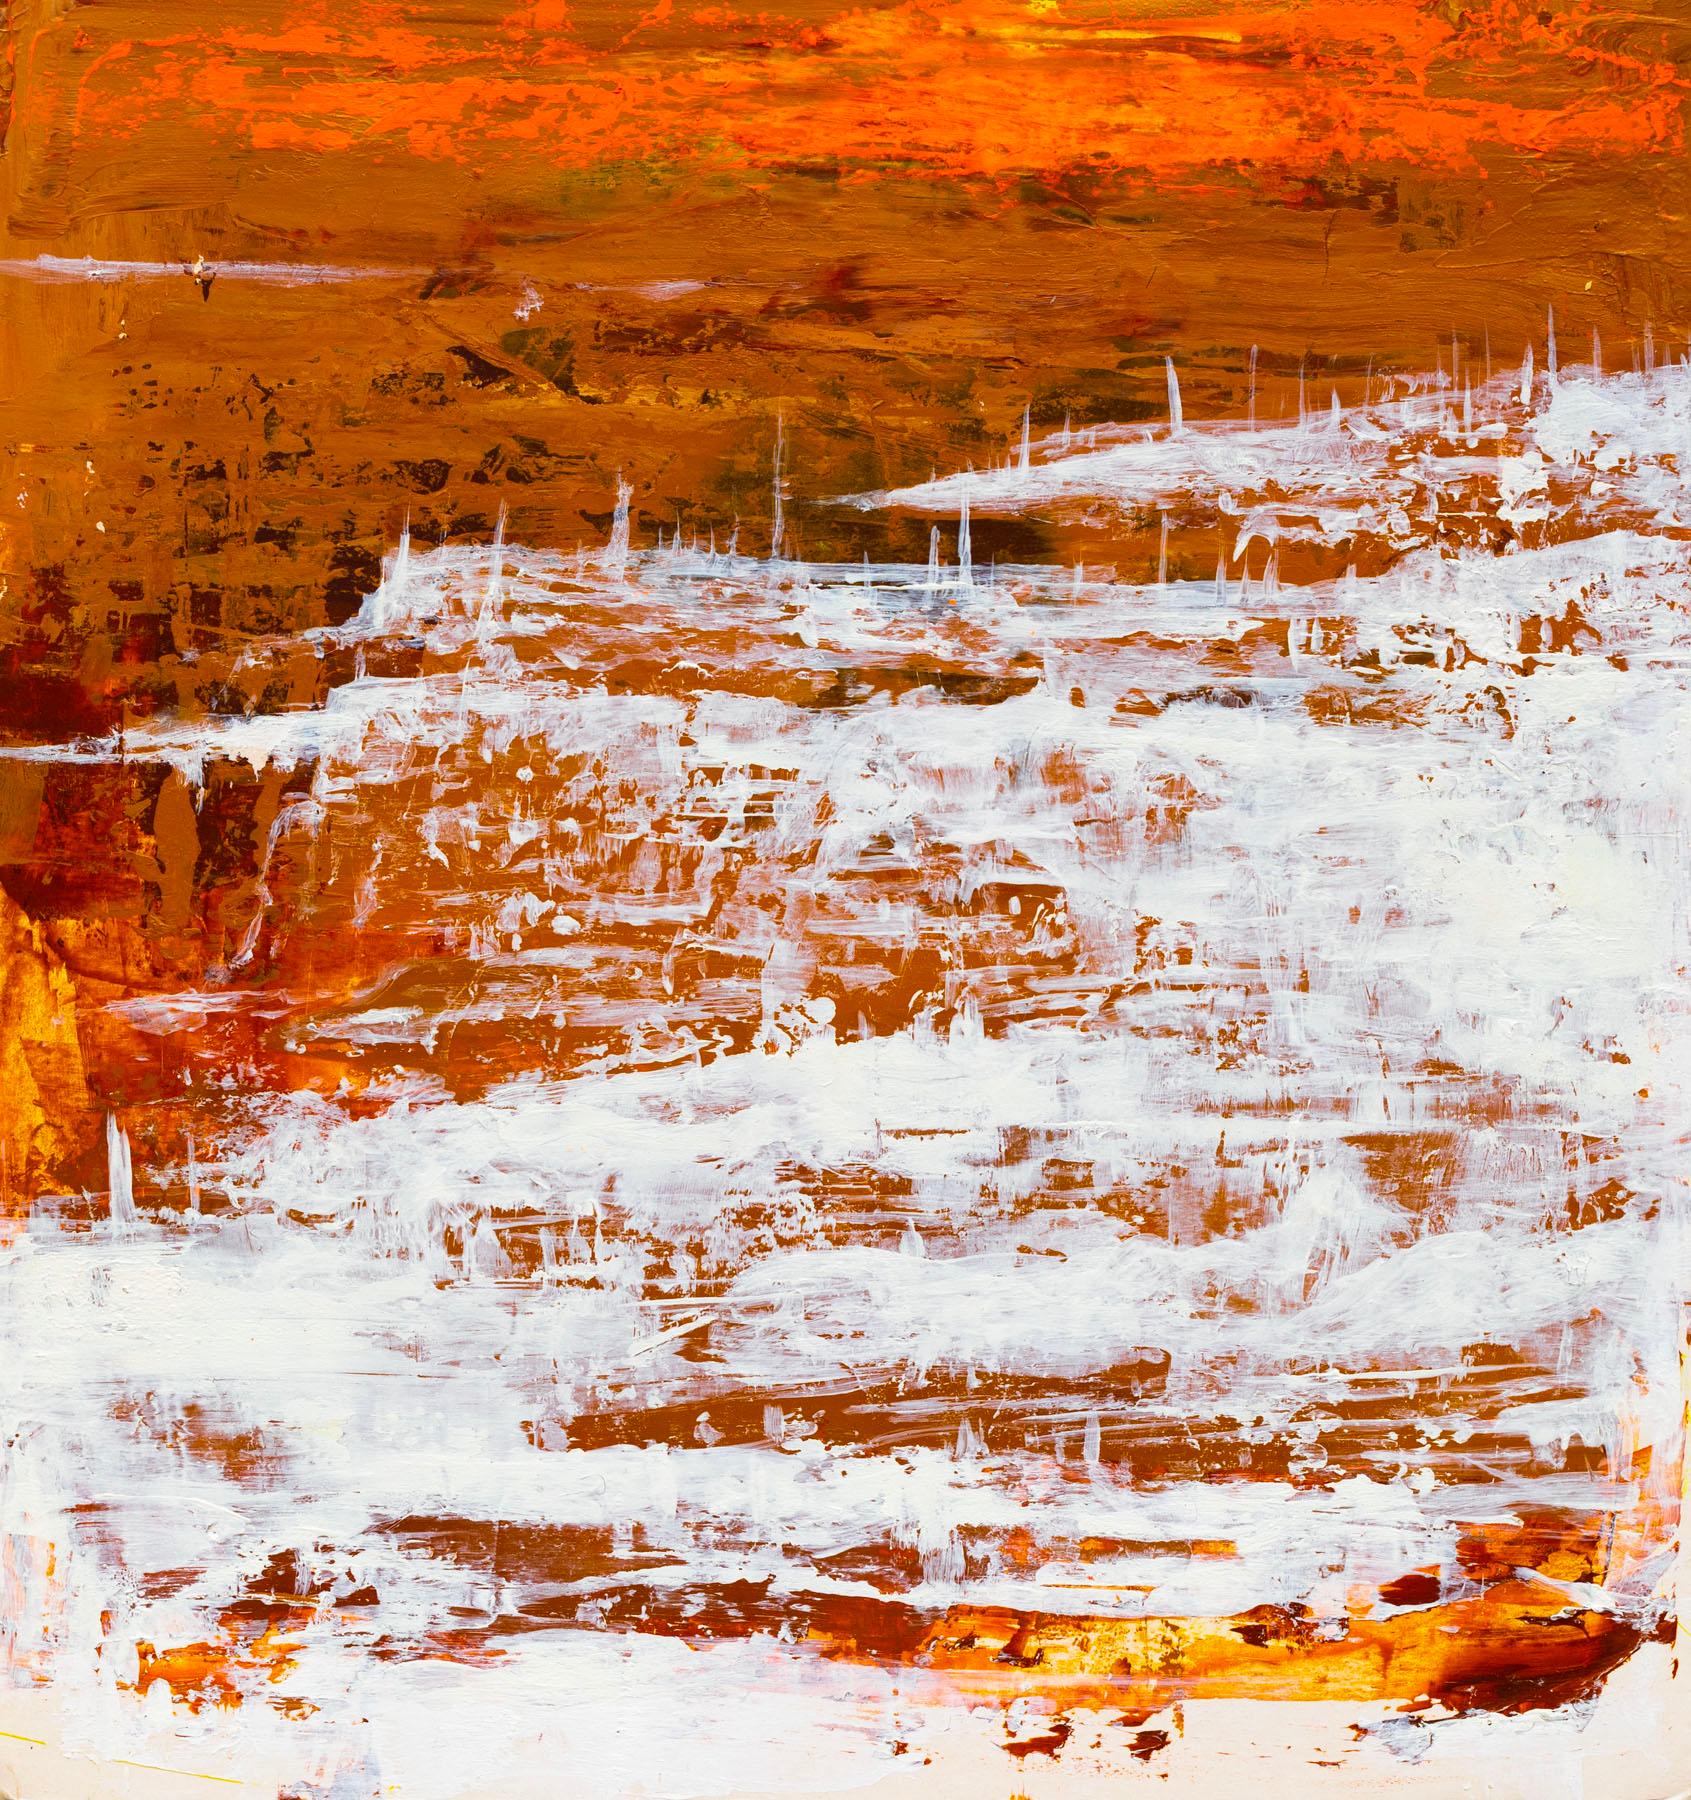 Jim Denney Figurative Painting - Fire and Ice, orange and white abstract oil painting on panel